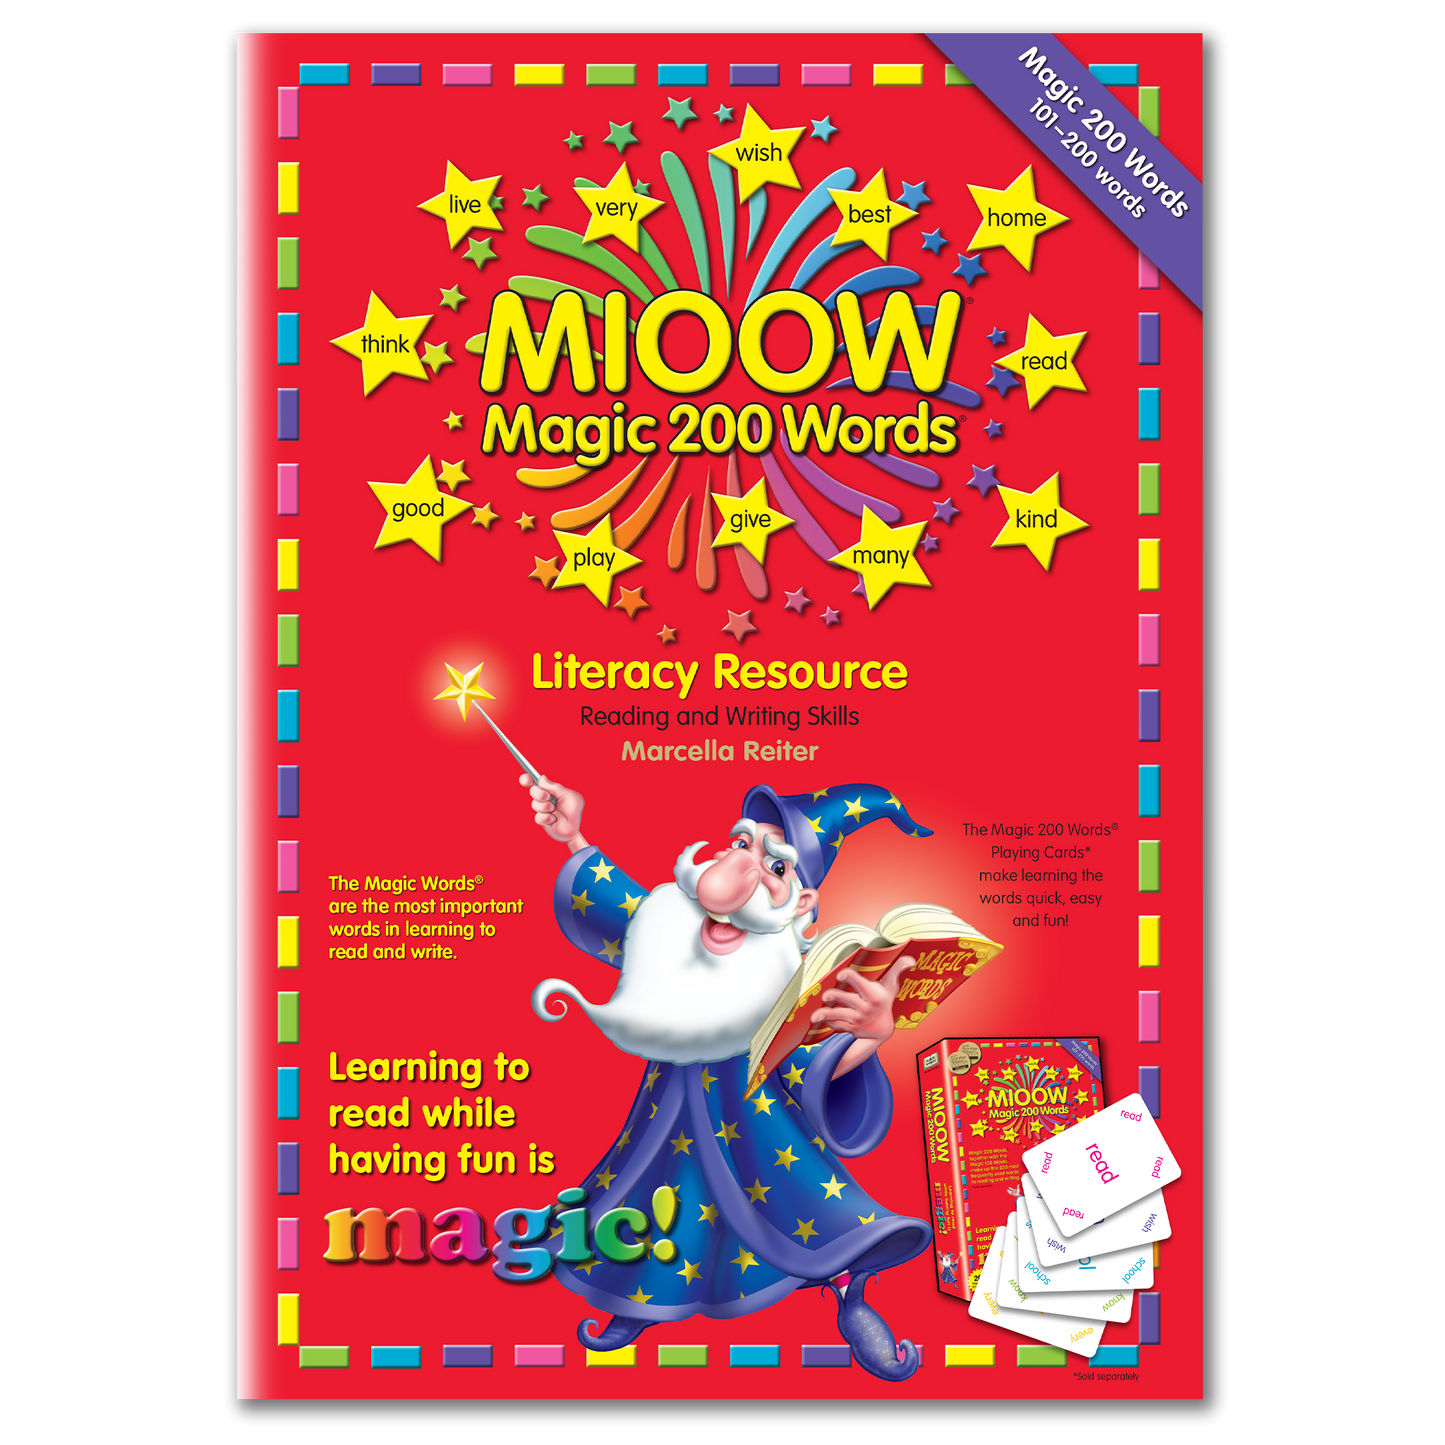 Msgic 200 Words Literacy Resource manual featuring the 200 most frequently used words in English together with th most important sight words for reading.